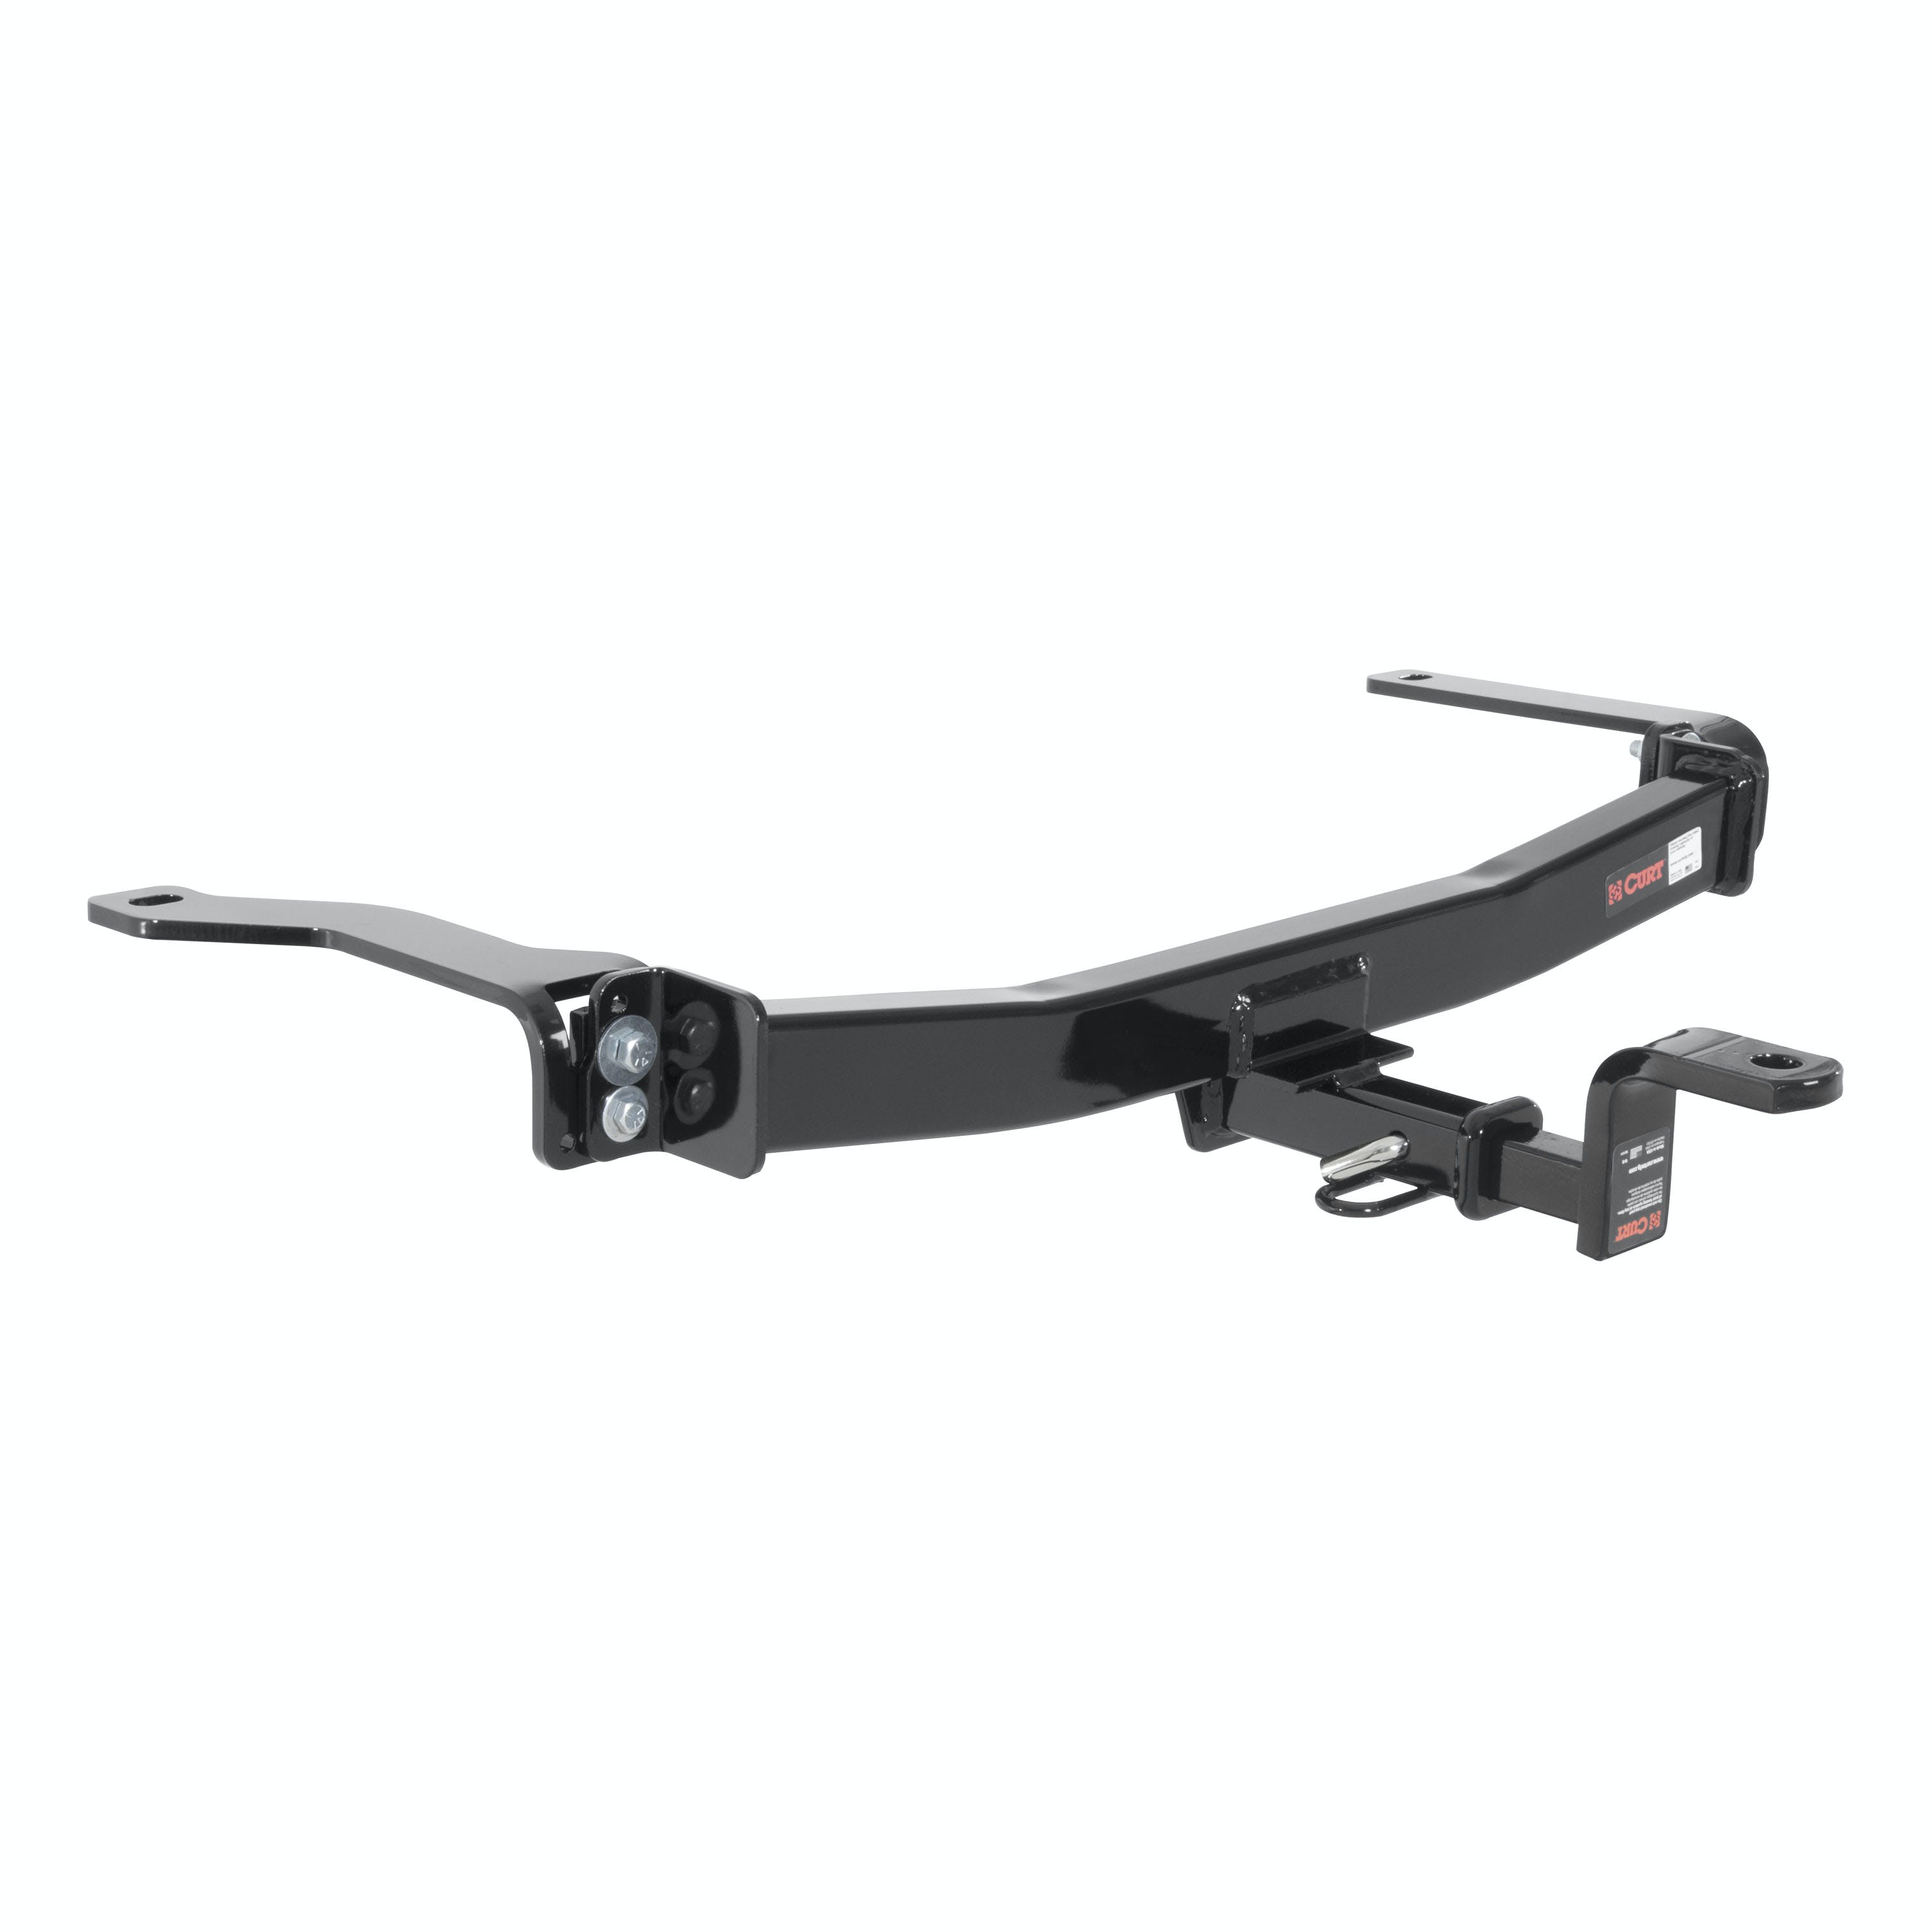 CURT 113193 Class 1 Trailer Hitch, 1-1/4 Ball Mount, Select Ford Focus